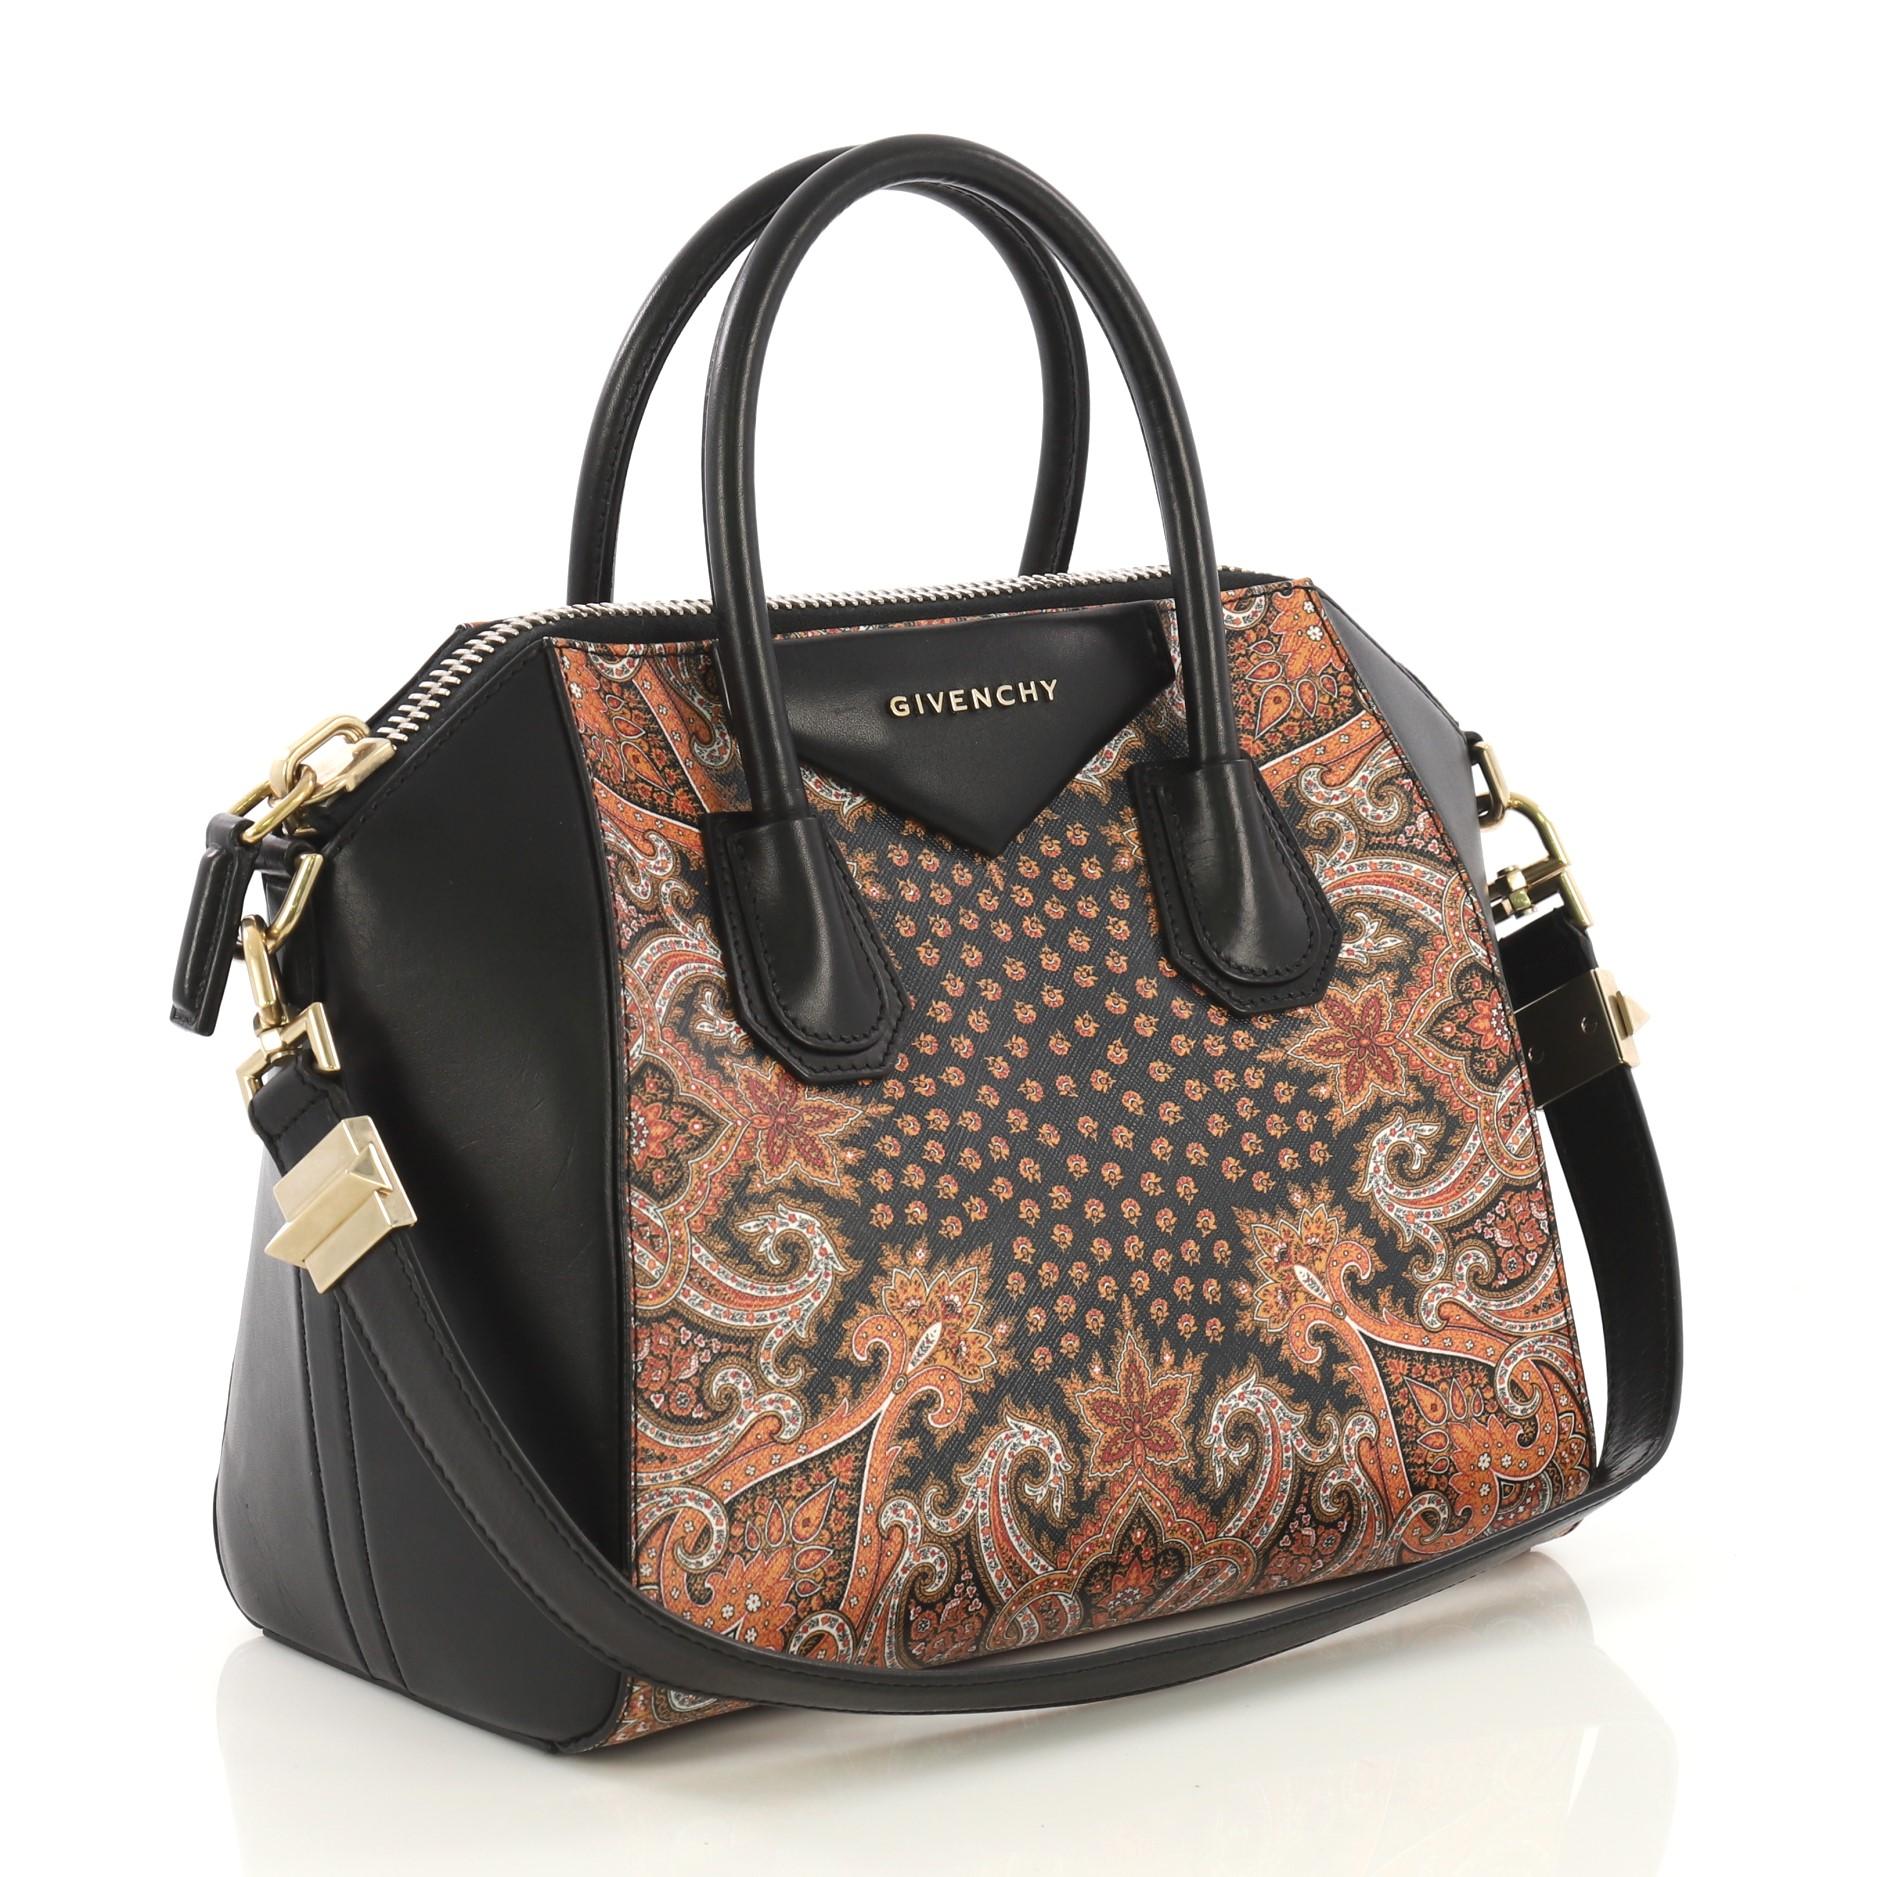 This Givenchy Antigona Bag Printed Leather Mini, crafted from black printed leather, features dual rolled leather handles and gold-tone hardware. Its zip-around closure opens to a black fabric interior with zip and slip pockets. 

Estimated Retail